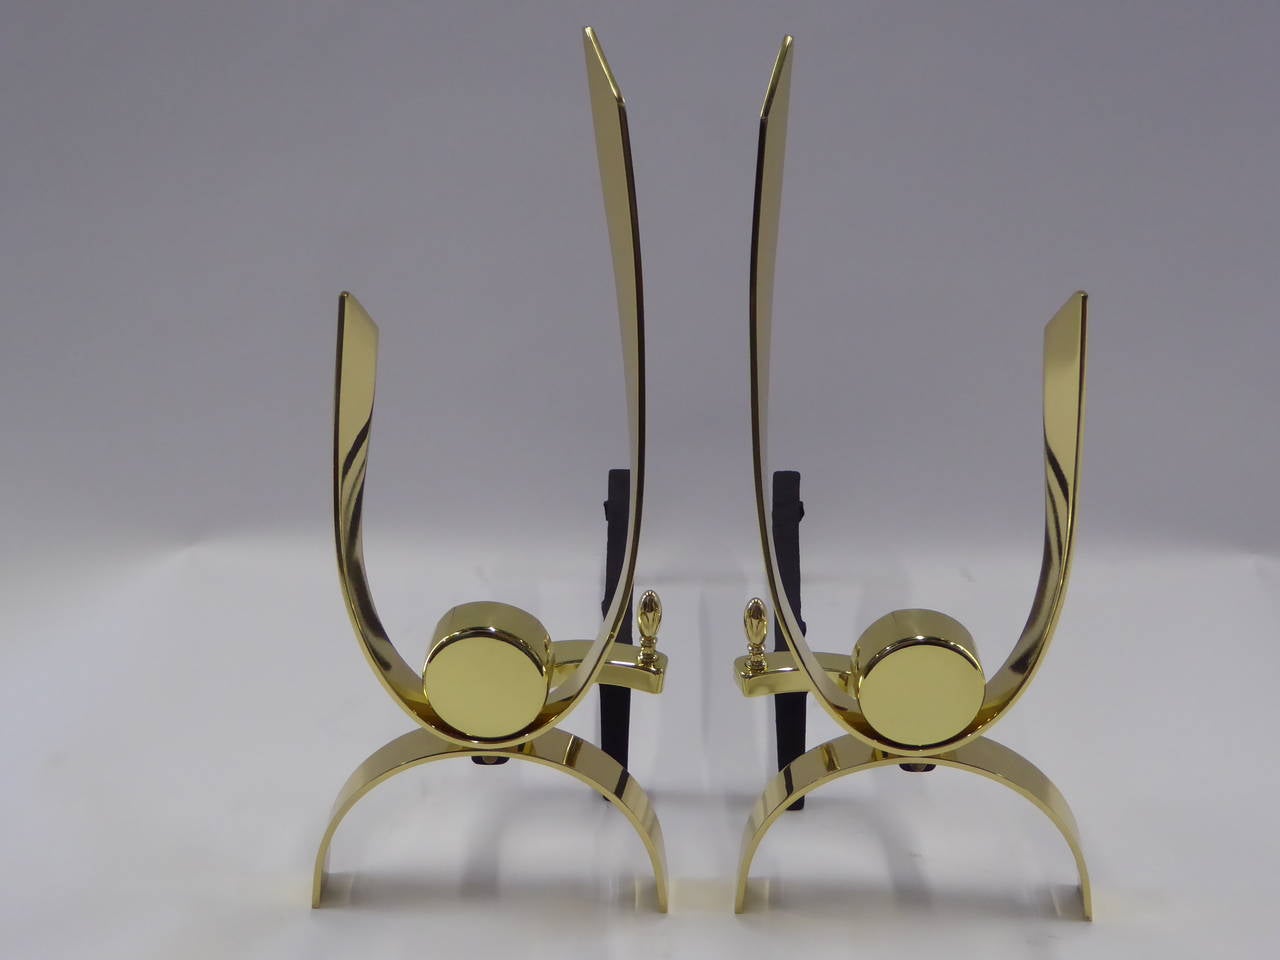 Thick polished brass ribbons arched and curved with a centered disc highlight this pair of andirons attributed to Donald Deskey. Freshly polished brass and re-blacked iron. Each disc with small split in brass (soldered